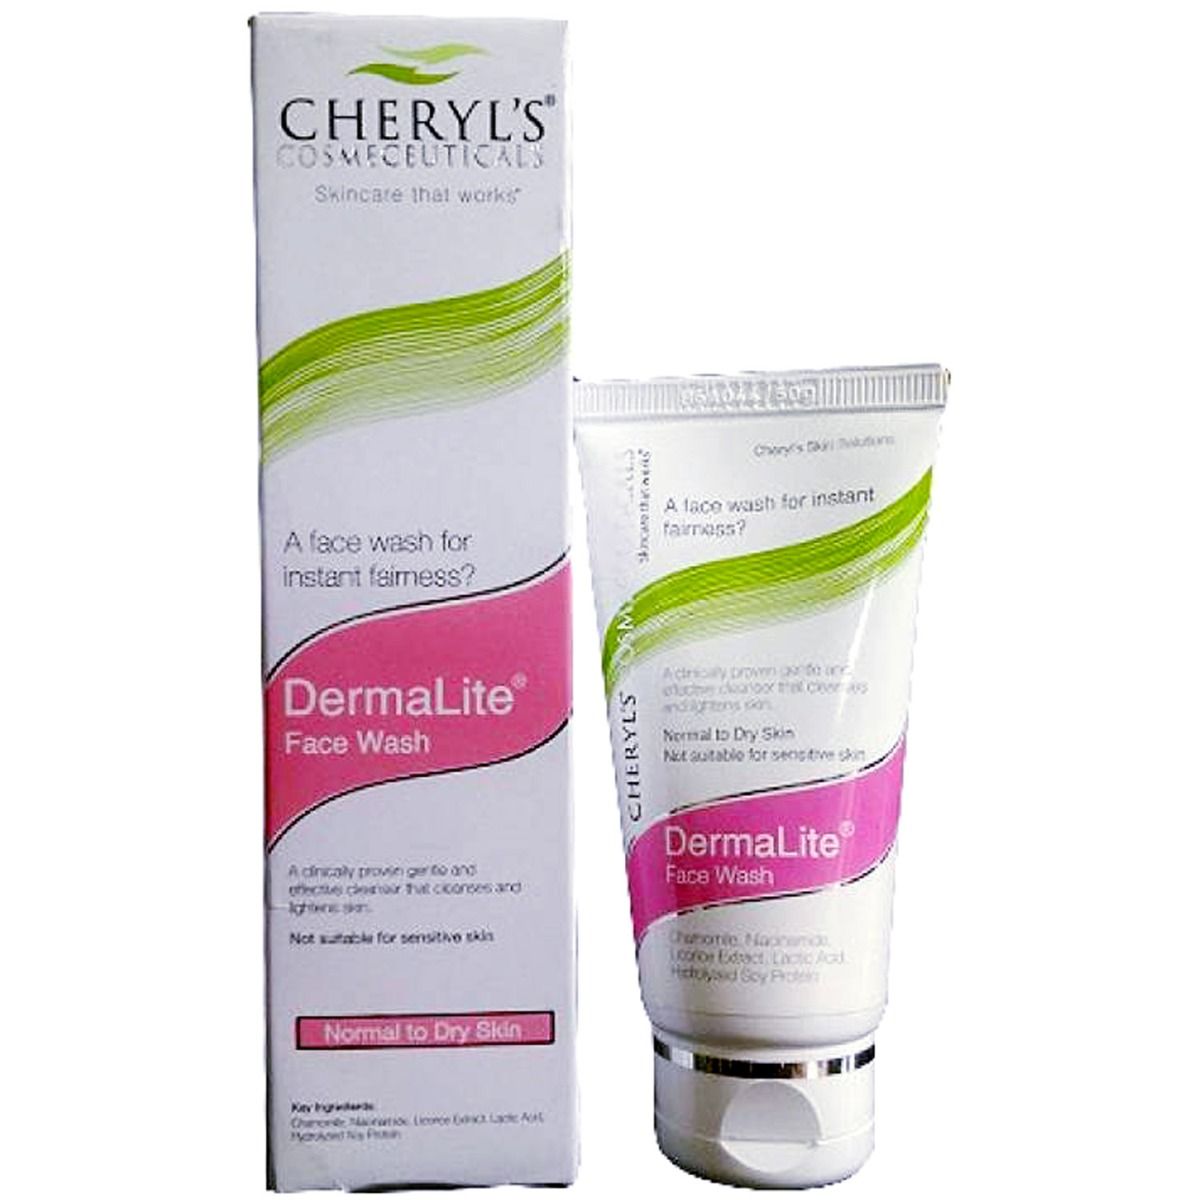 Buy Cheryl's Dermalite Face Wash For Normal to Dry Skin, 100 ml Online